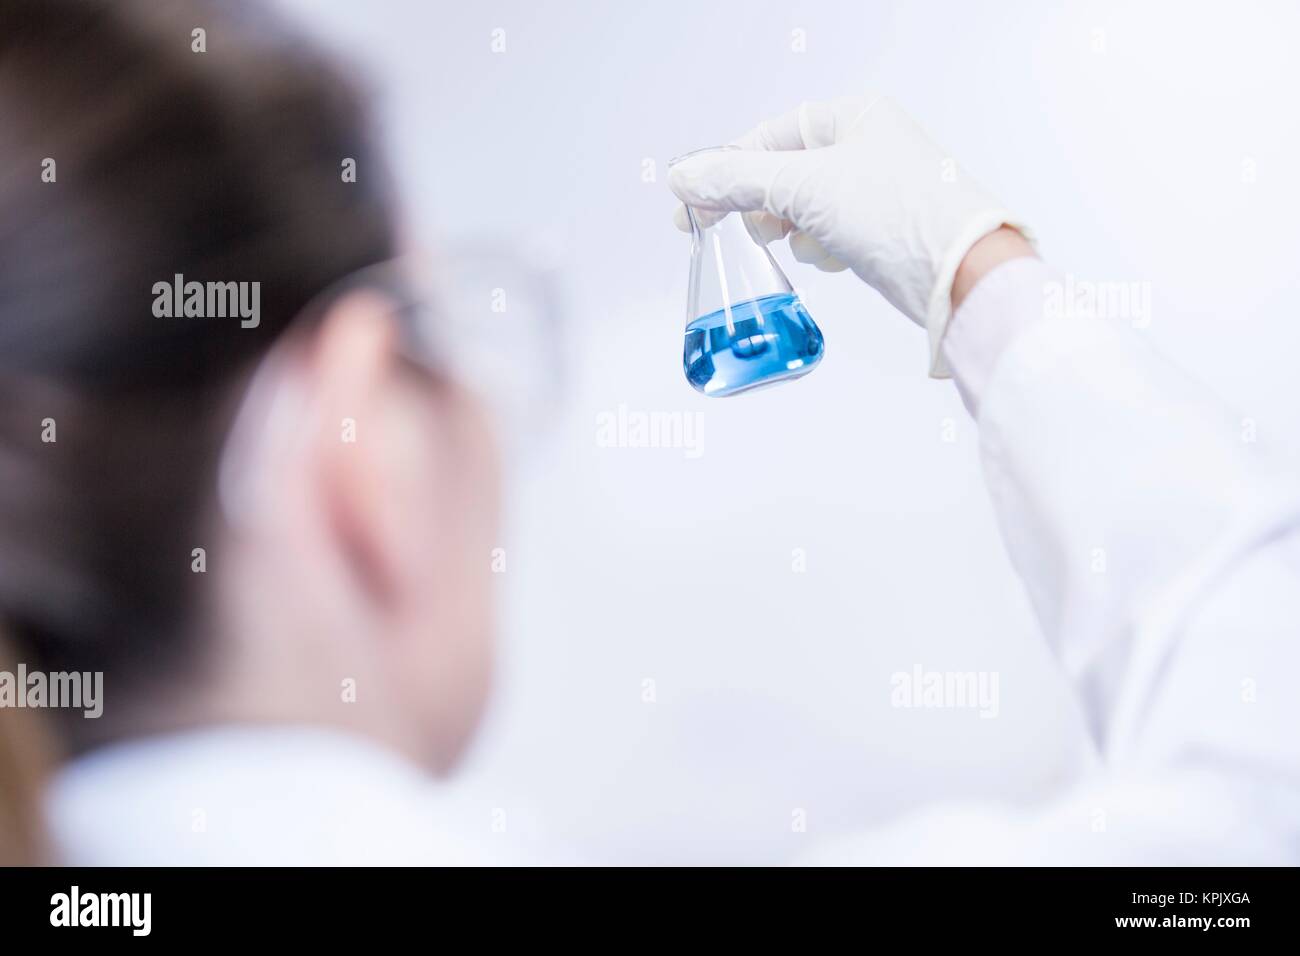 Laboratory assistant holding chemical flask containing blue liquid. Stock Photo